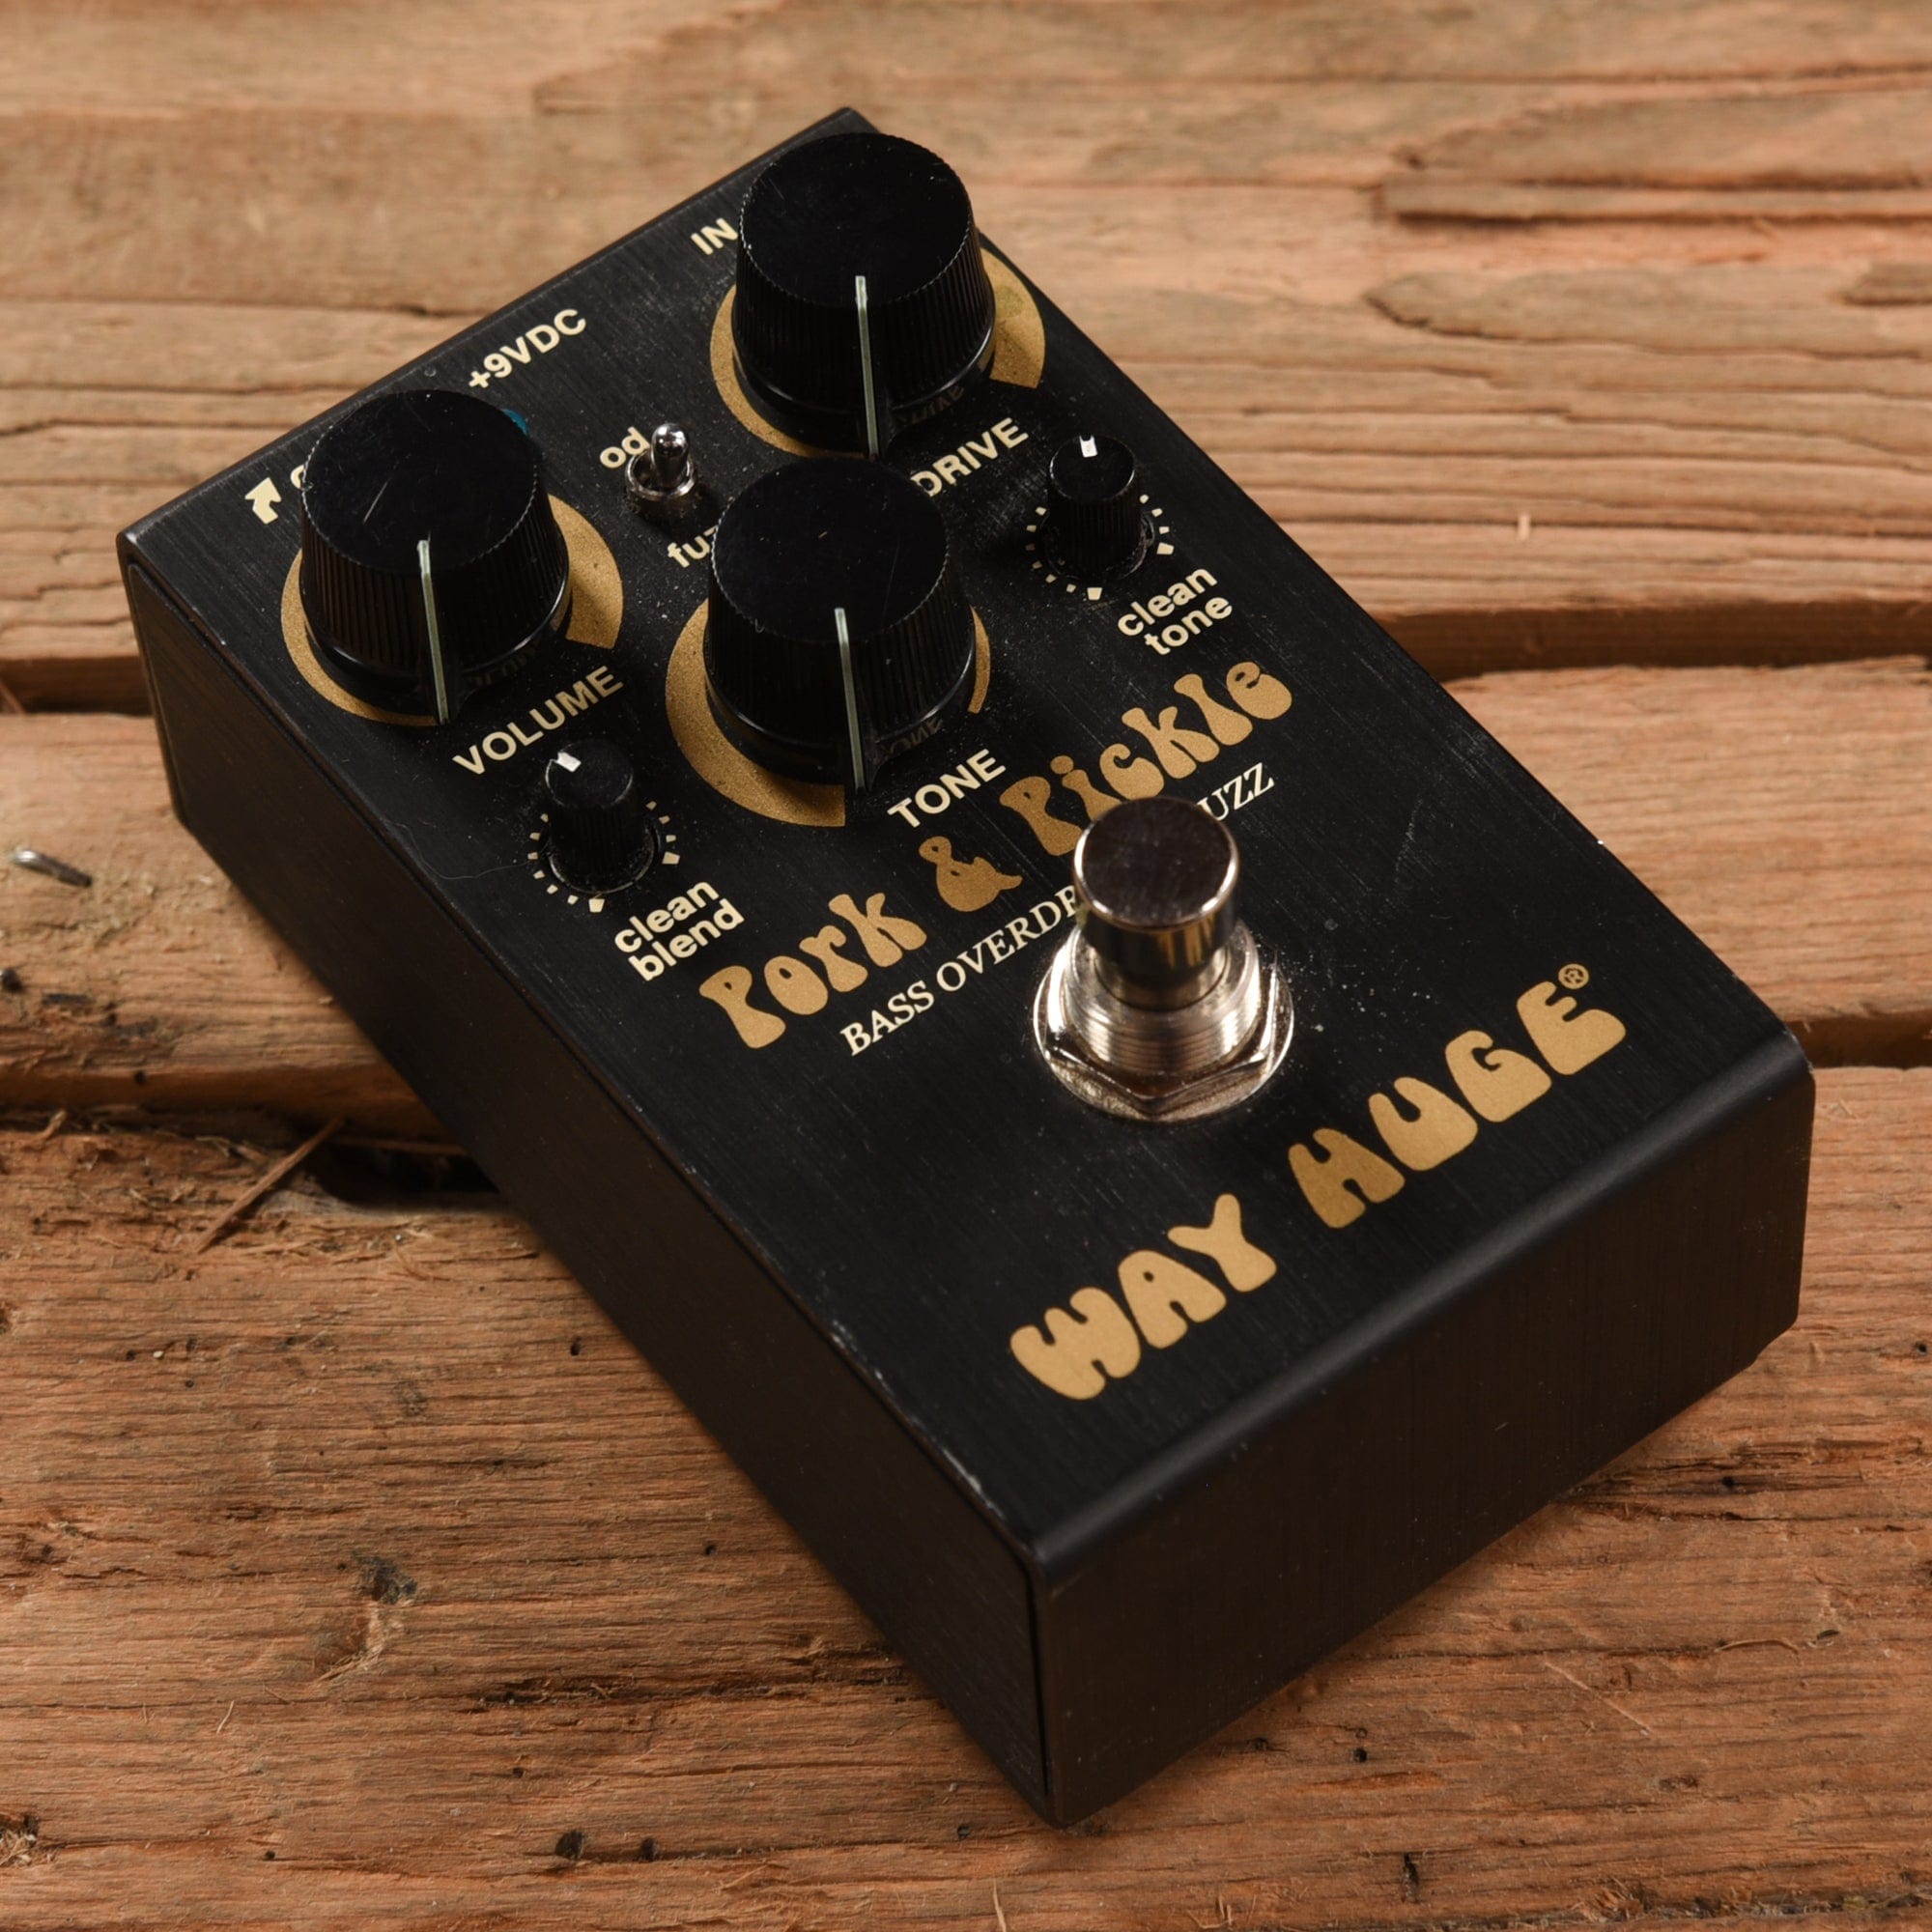 Way Huge WM91 Smalls Series Pork & Pickle Bass Overdrive & Fuzz Effects and Pedals / Fuzz